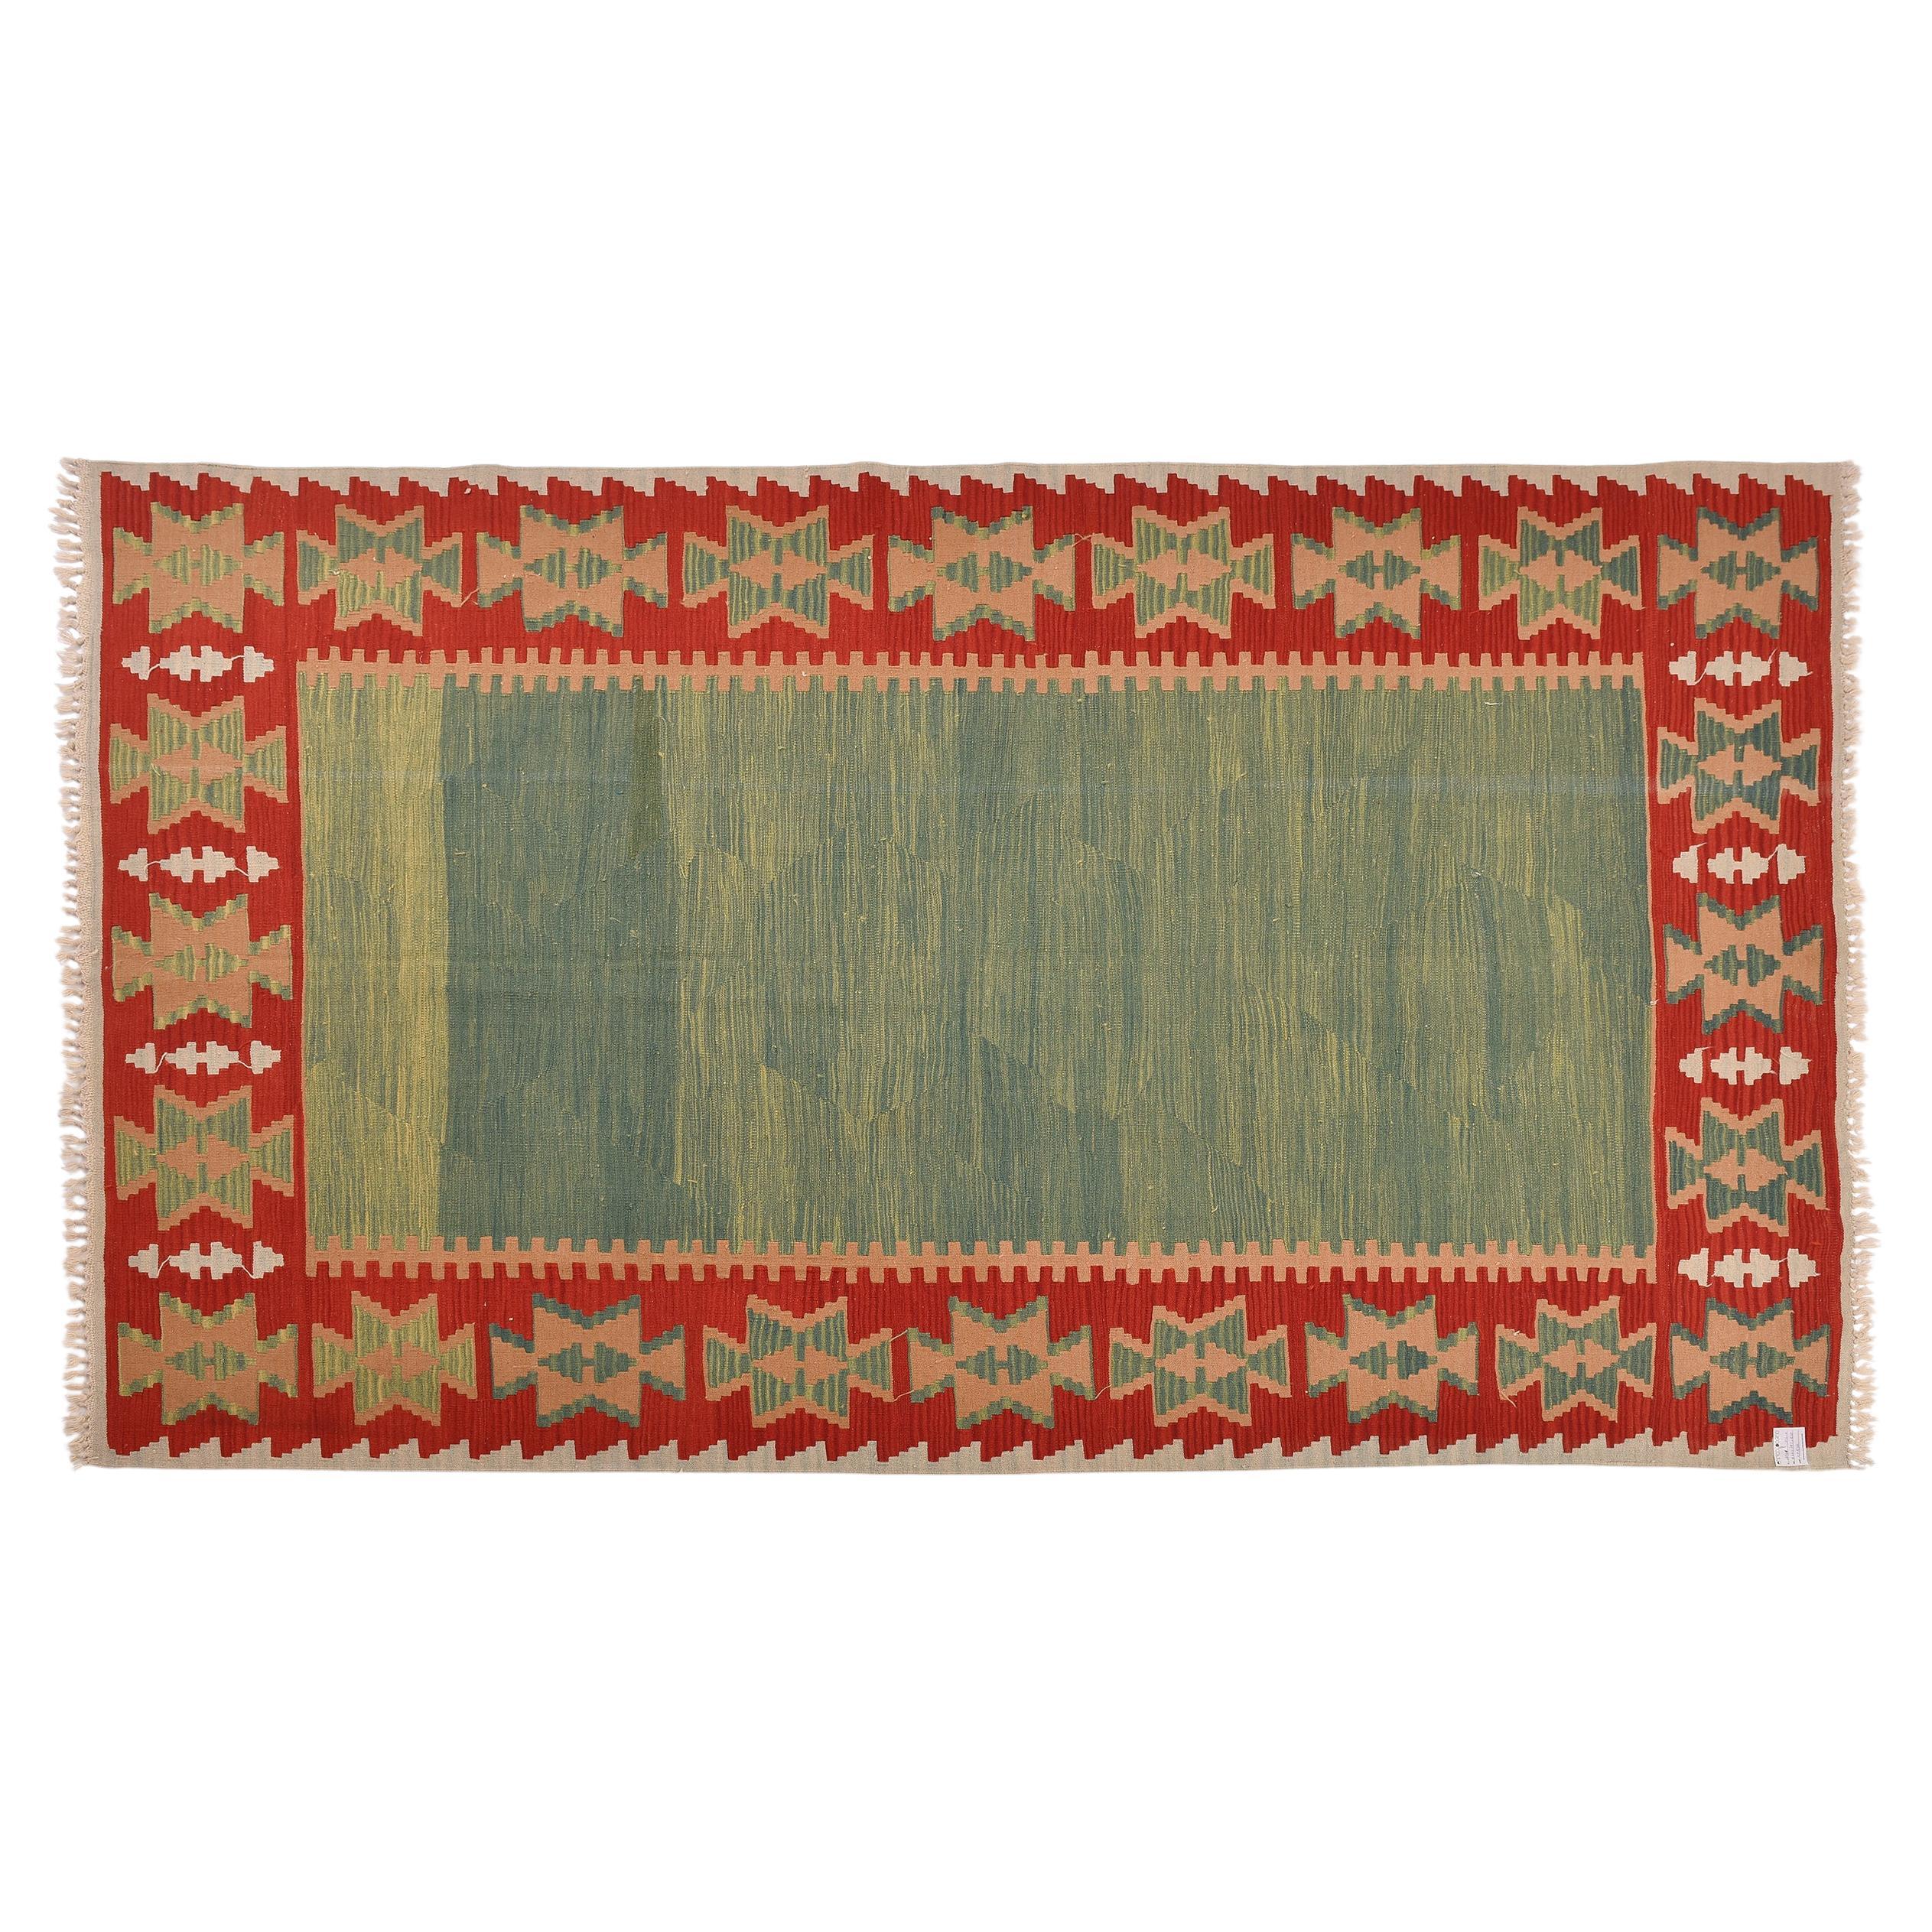 nr. 1341 - Vintage Turkish kilim KONYA, with an unusual beautiful green enclosed in a red frame.
Konya is one of the most famous towns in the Middle East.
Good size for living room.